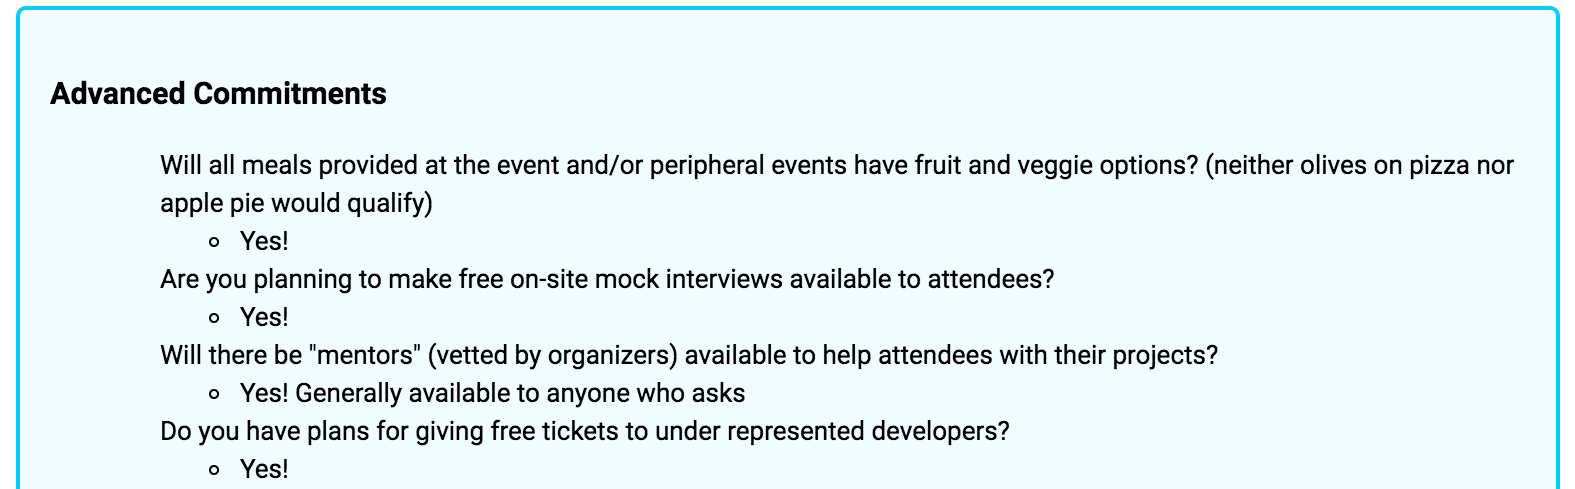 Screenshot of an email generated by the CLI tool. Reads: "Advanced Commitments: Will all meals provided at the event and/or peripheral events have fruit and veggie options? (neither olives on pizza nor apple pie would qualify) Yes! Are you planning to make free on-site mock interviews available to attendees? Yes! Will there be mentors (vetted by organizers) available to help attendees with their projects? Yes! Generally available to anyone who asks. Do you have plans for giving free tickets to underrepresented developers? Yes!"